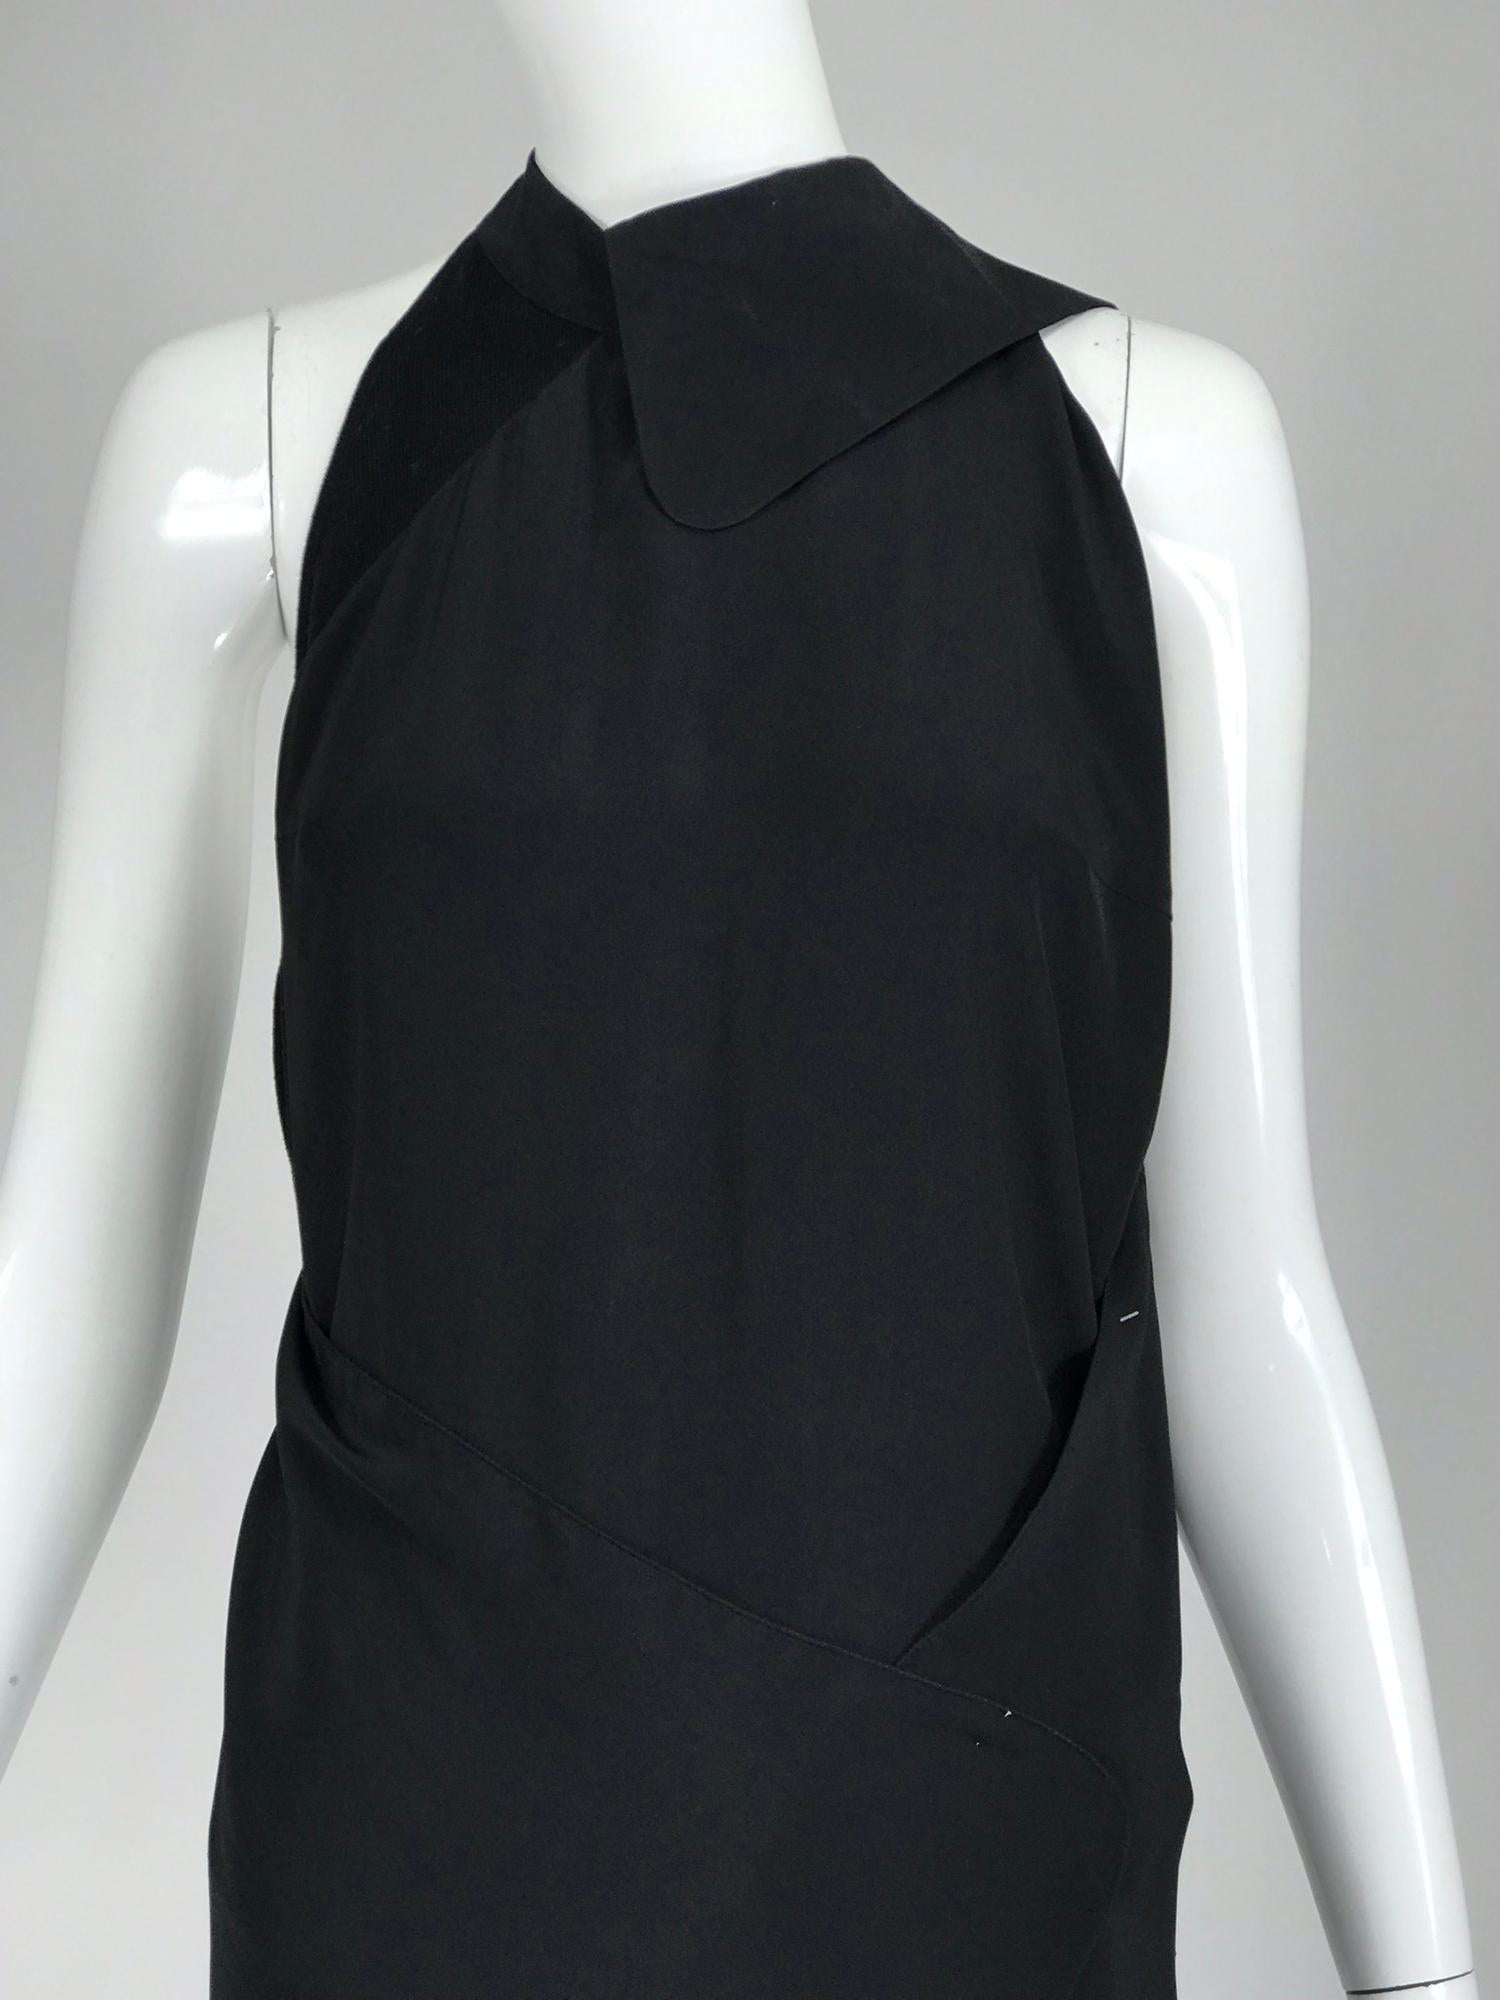 Gianfranco Ferre Black Silk and Sweater Knit Body Suit and Wrap or Drape 1980s For Sale 3